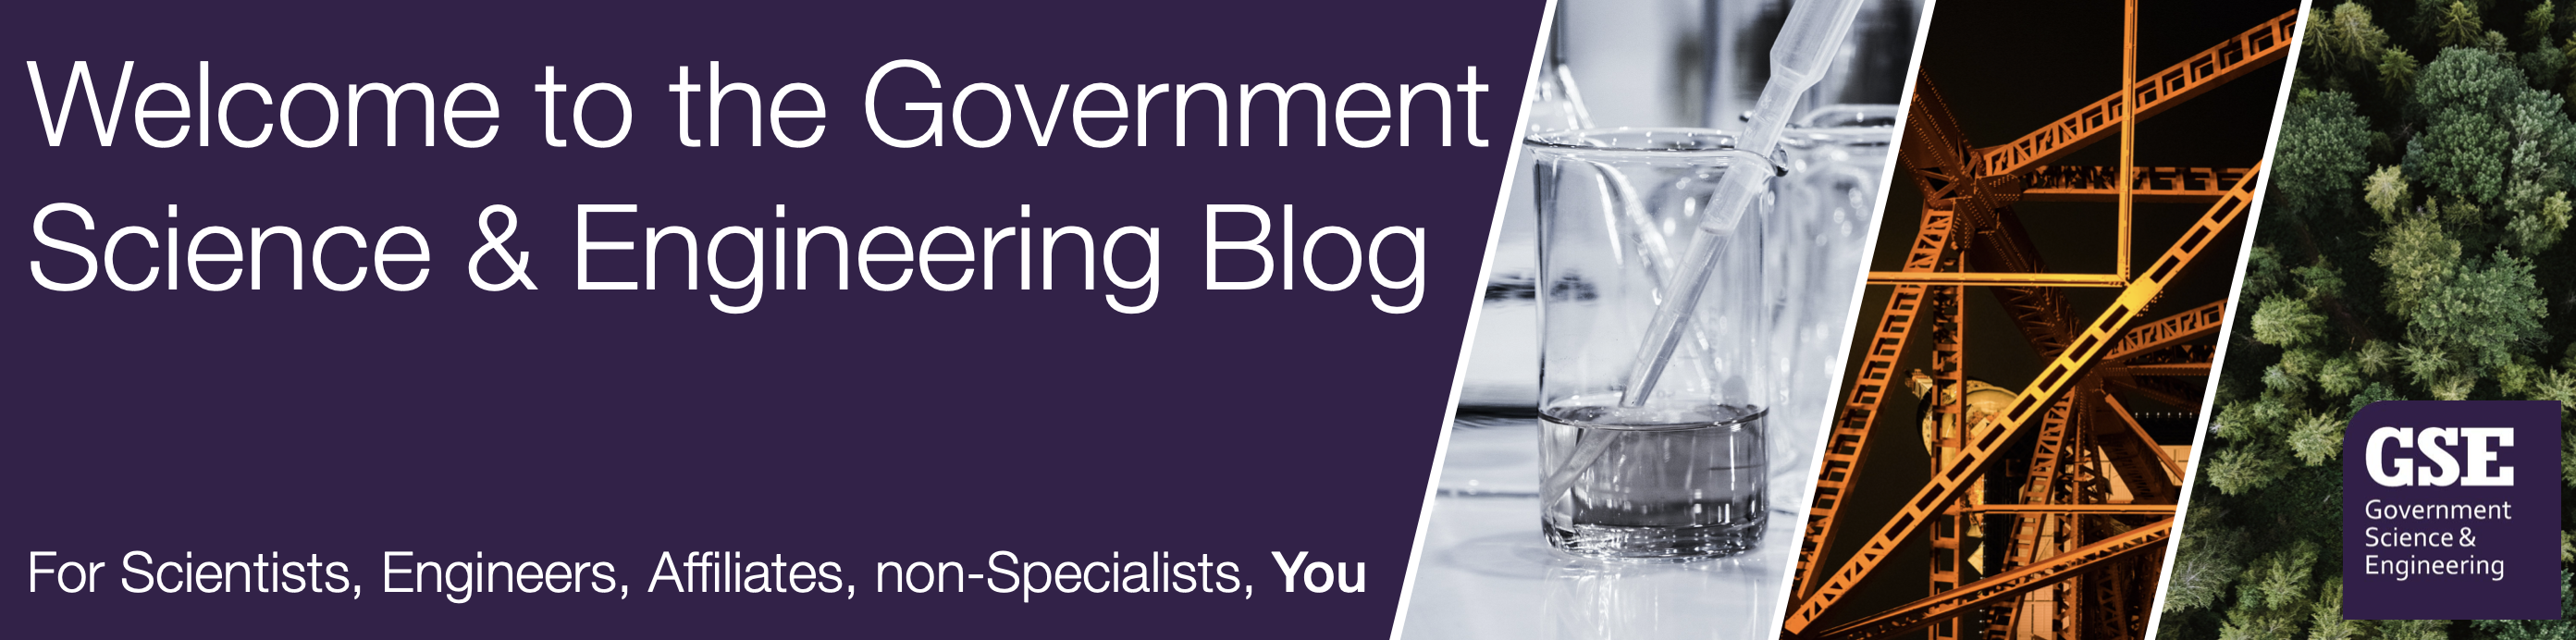 Welcome to the Government Science & Engineering Blog. For Scientists, Engineers, Affiliates, non-Specialists, You